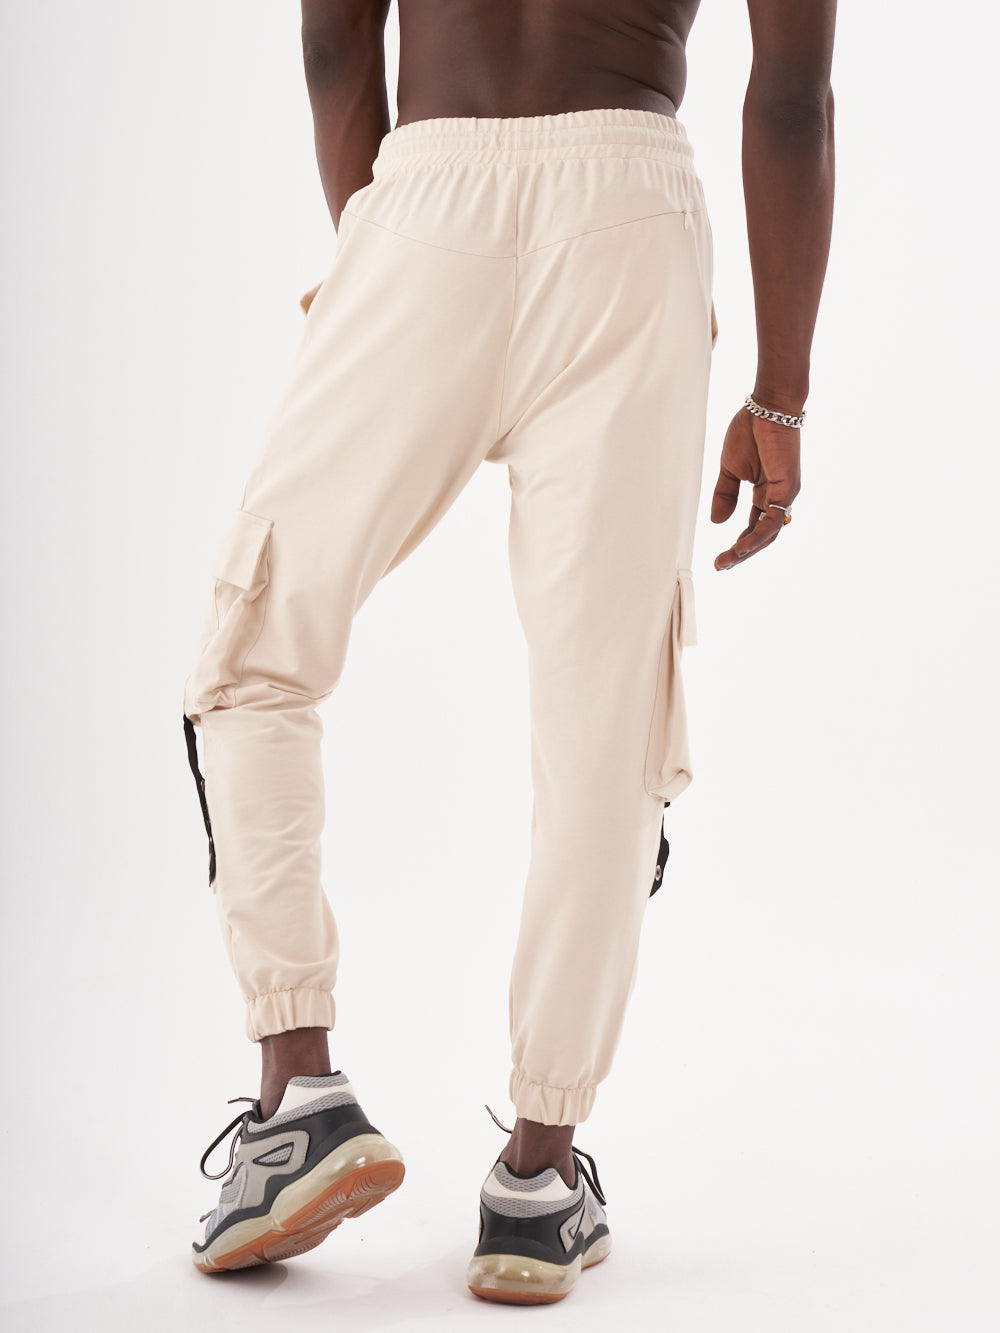 The back view of a man wearing Cascade Joggers.